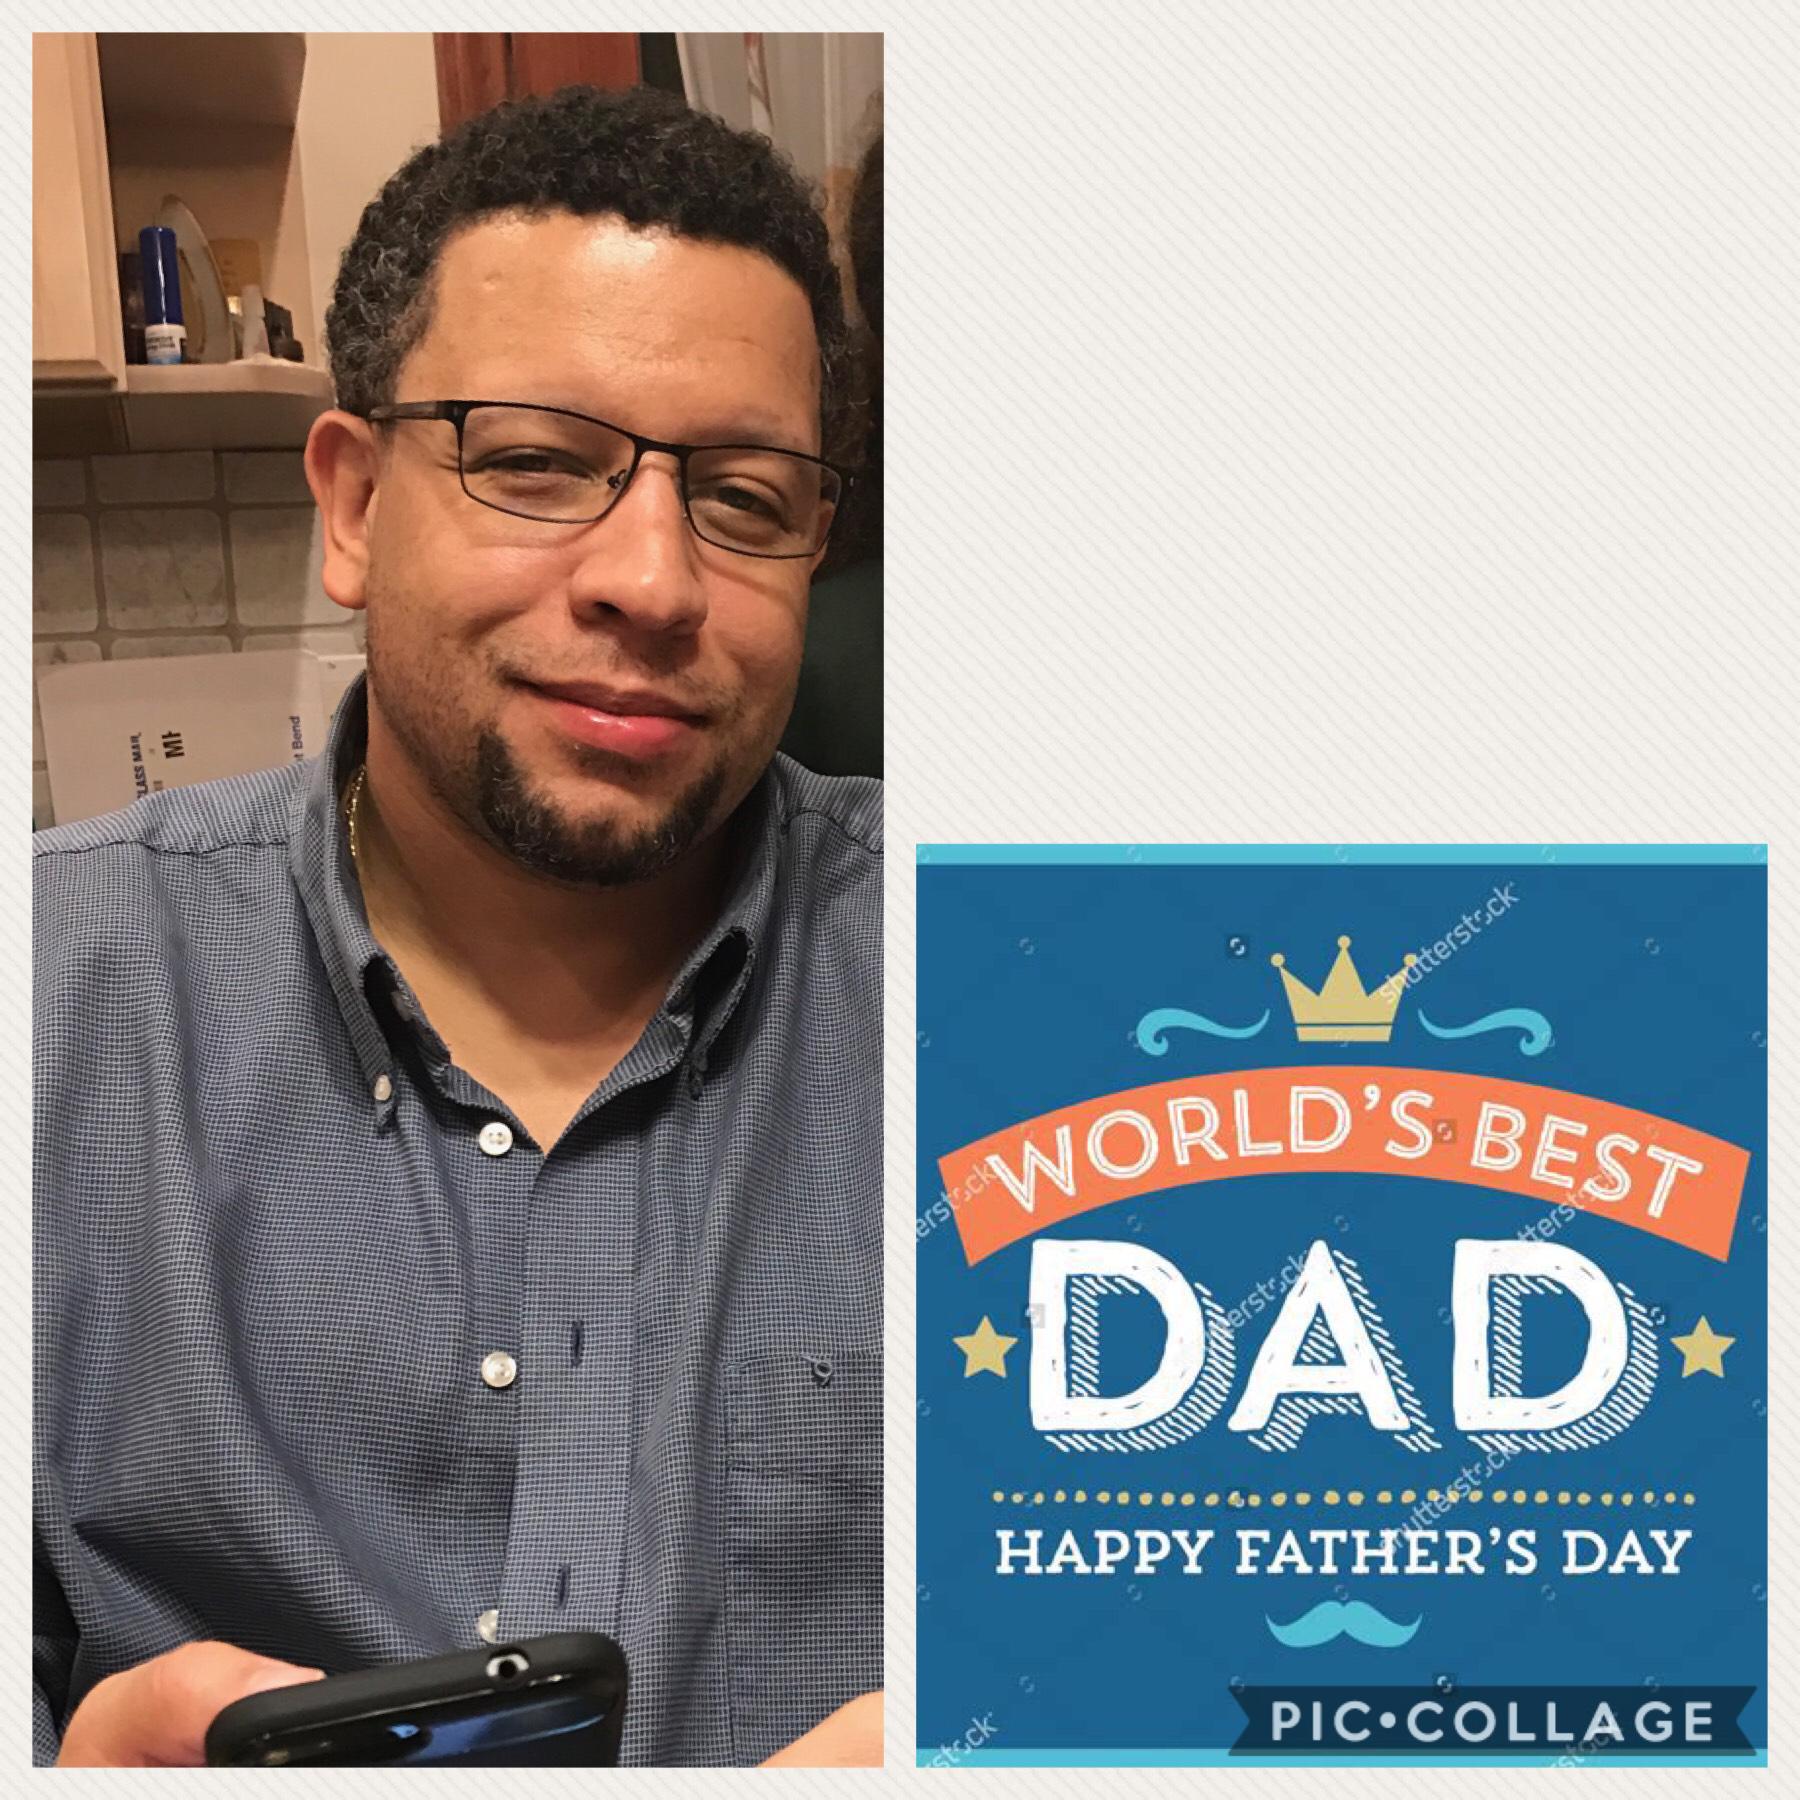 Happy Father’s Day to the best dad ever